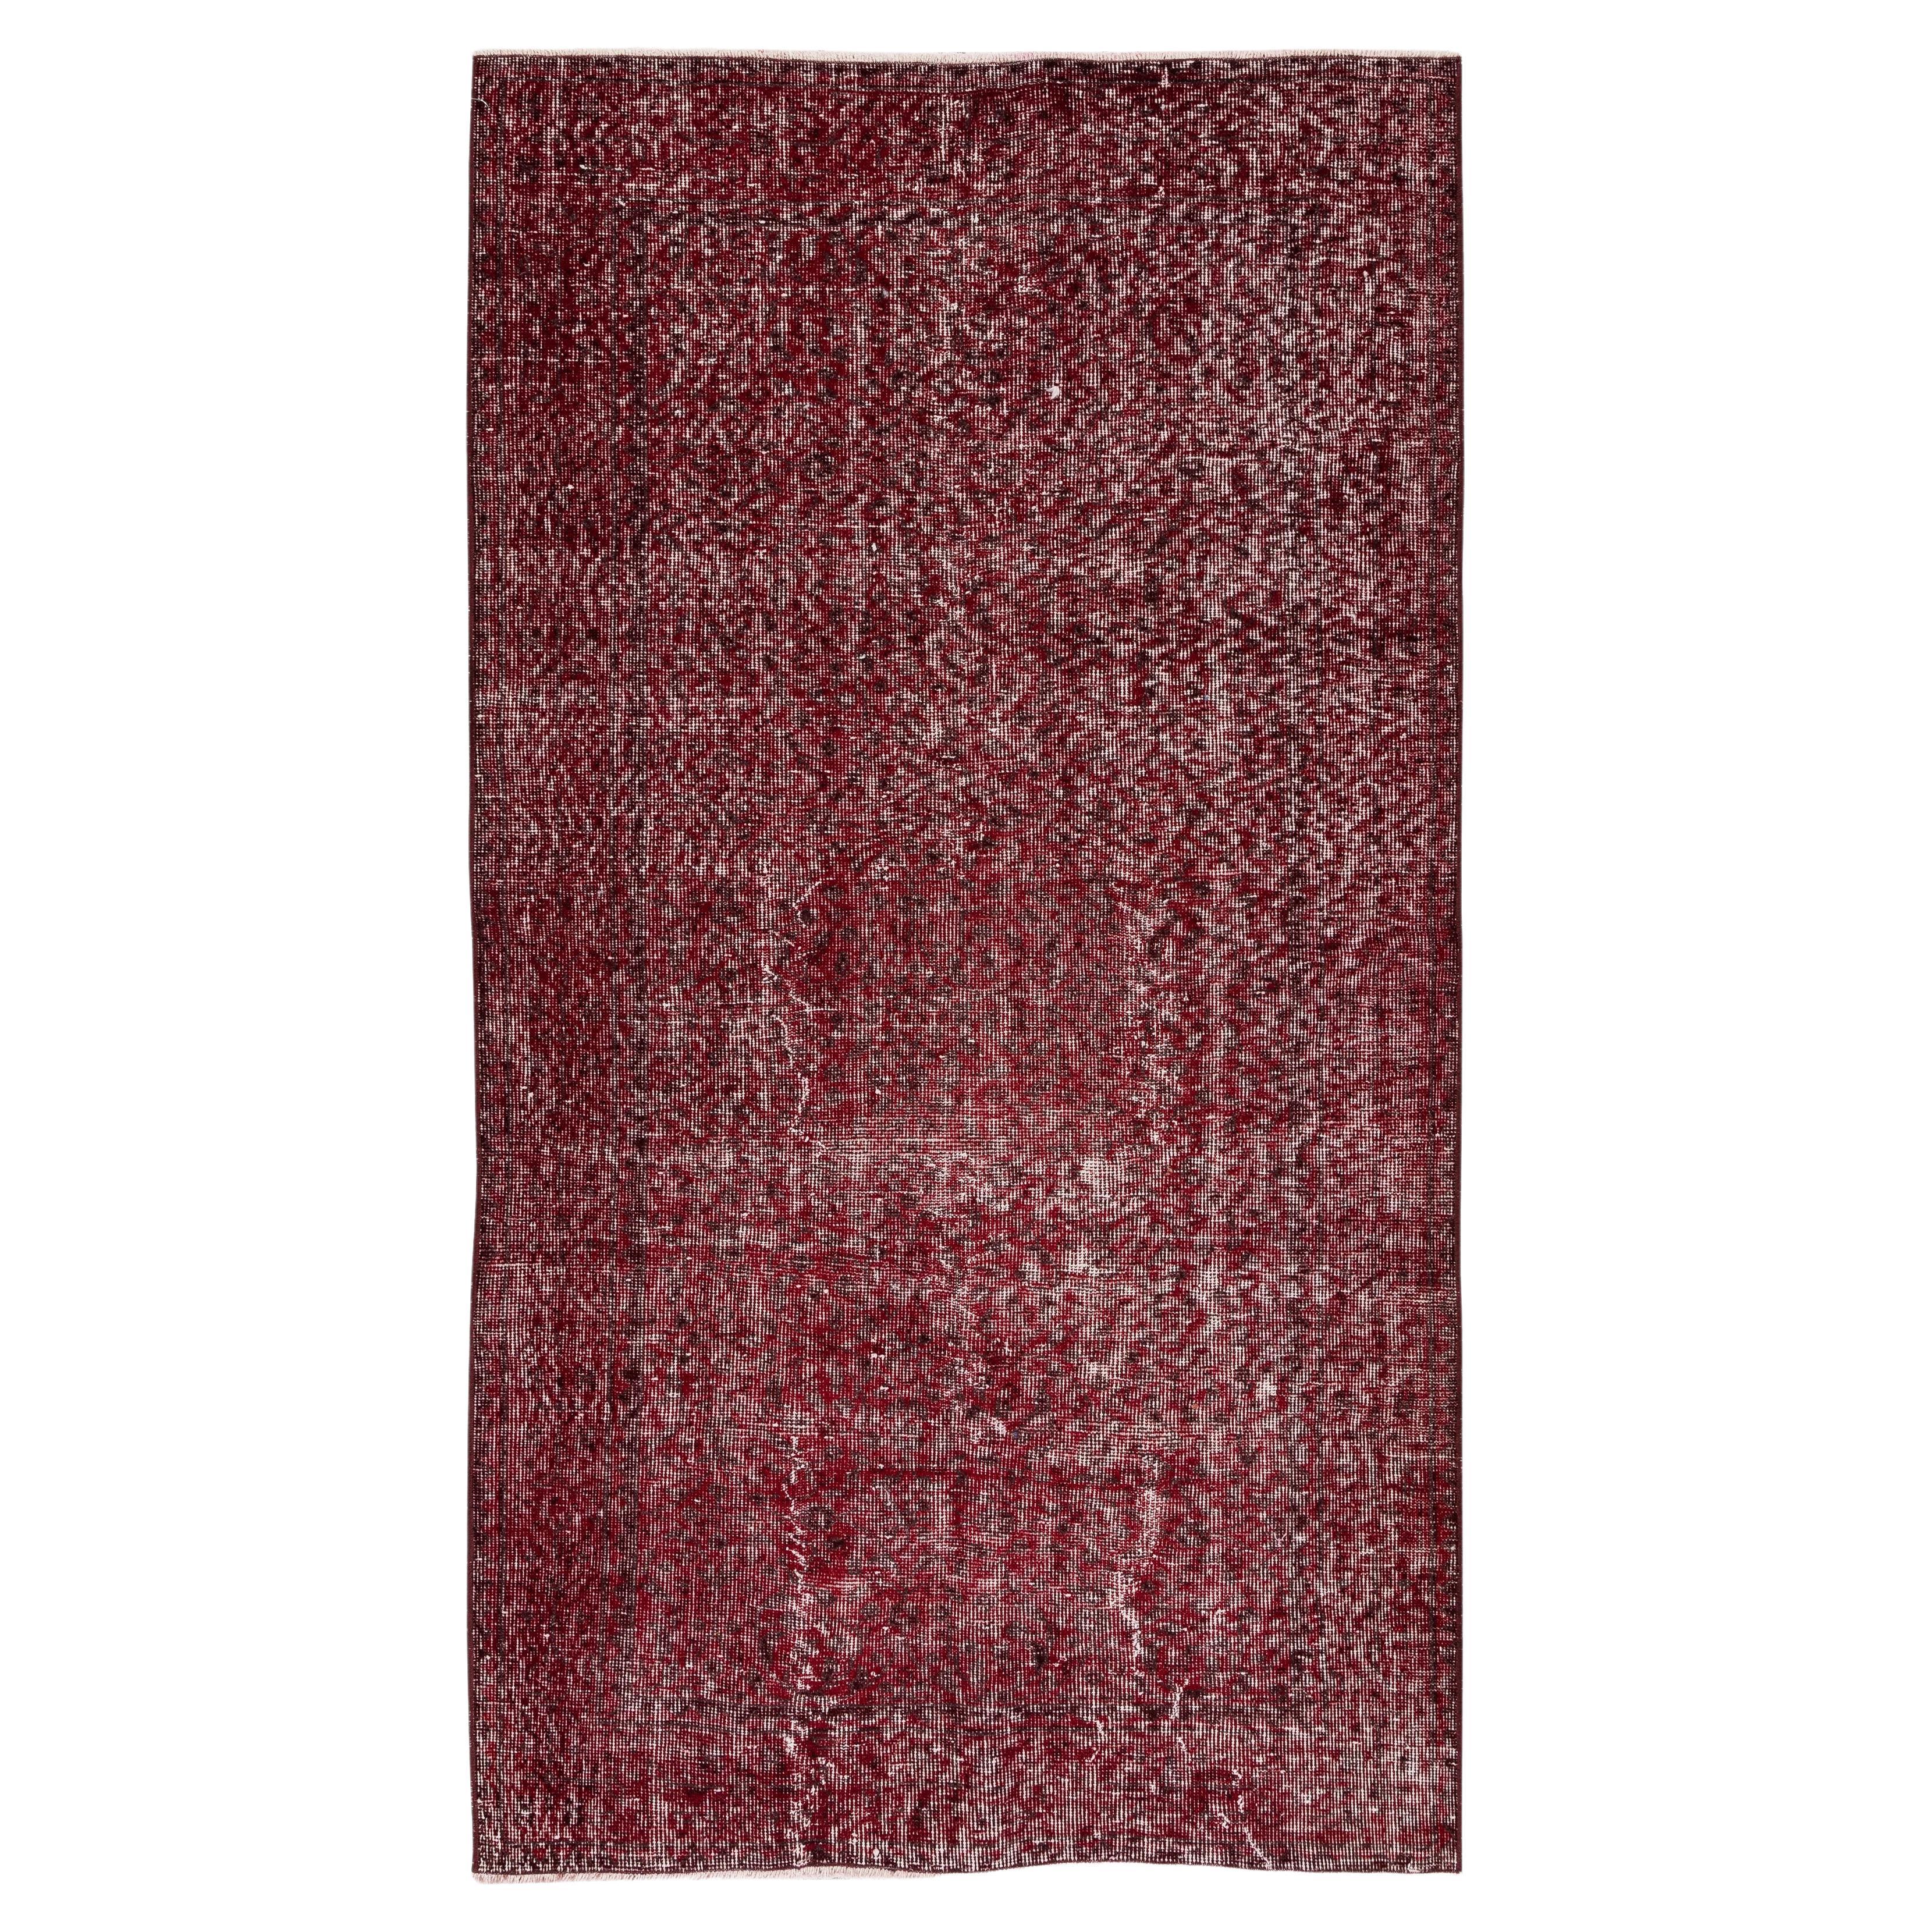 4x7 Ft Contemporary Handmade Red Accent Rug from Central Anatolia